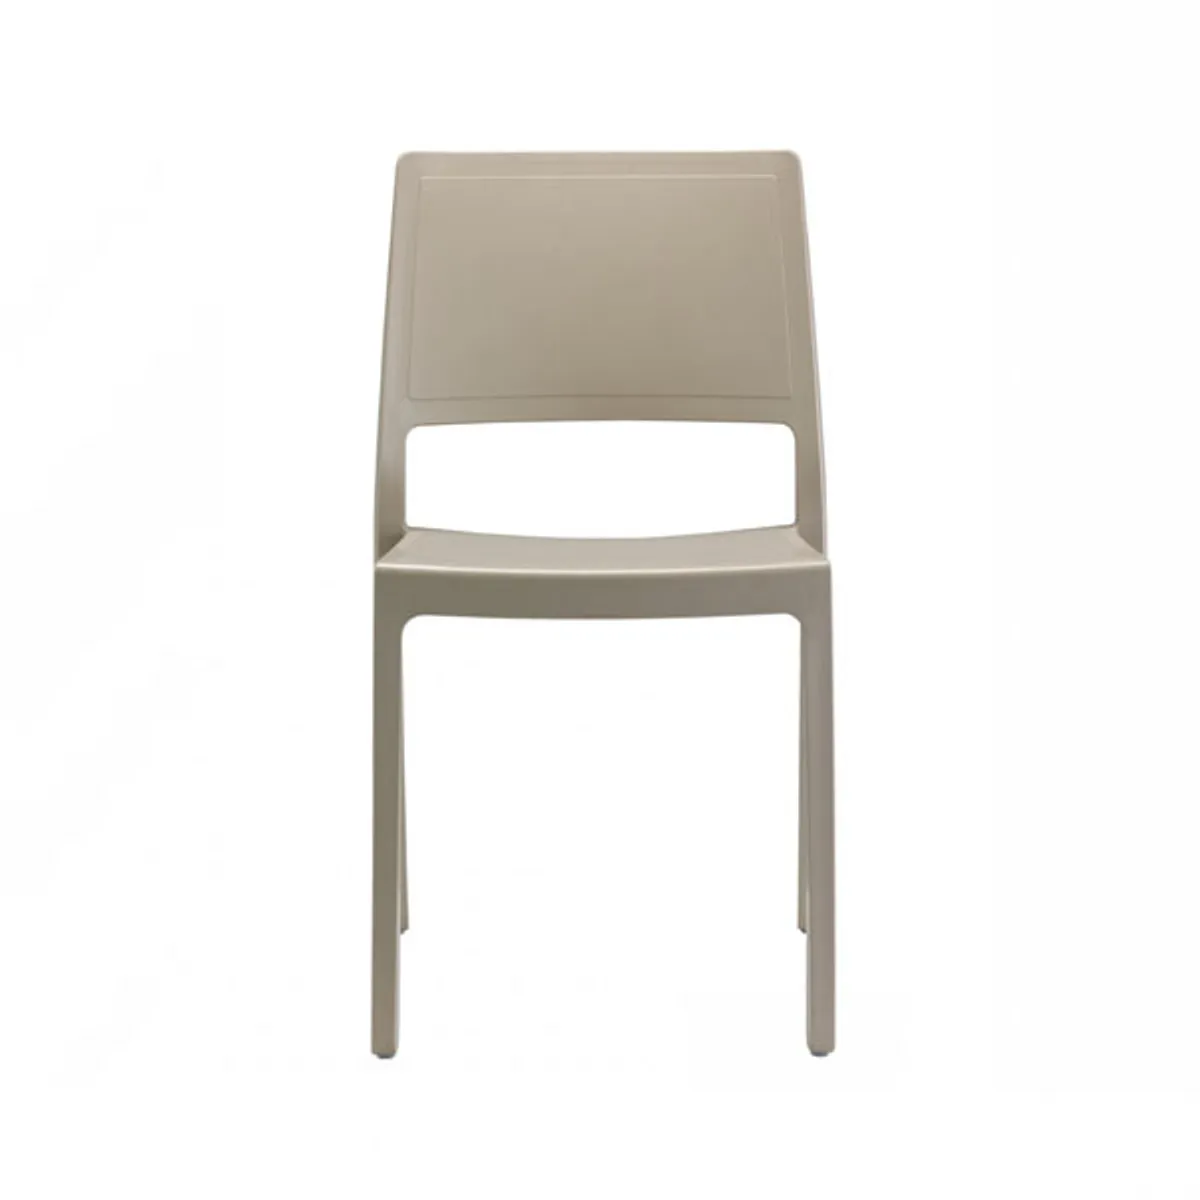 Remi side chair 1 Inside Out Contracts